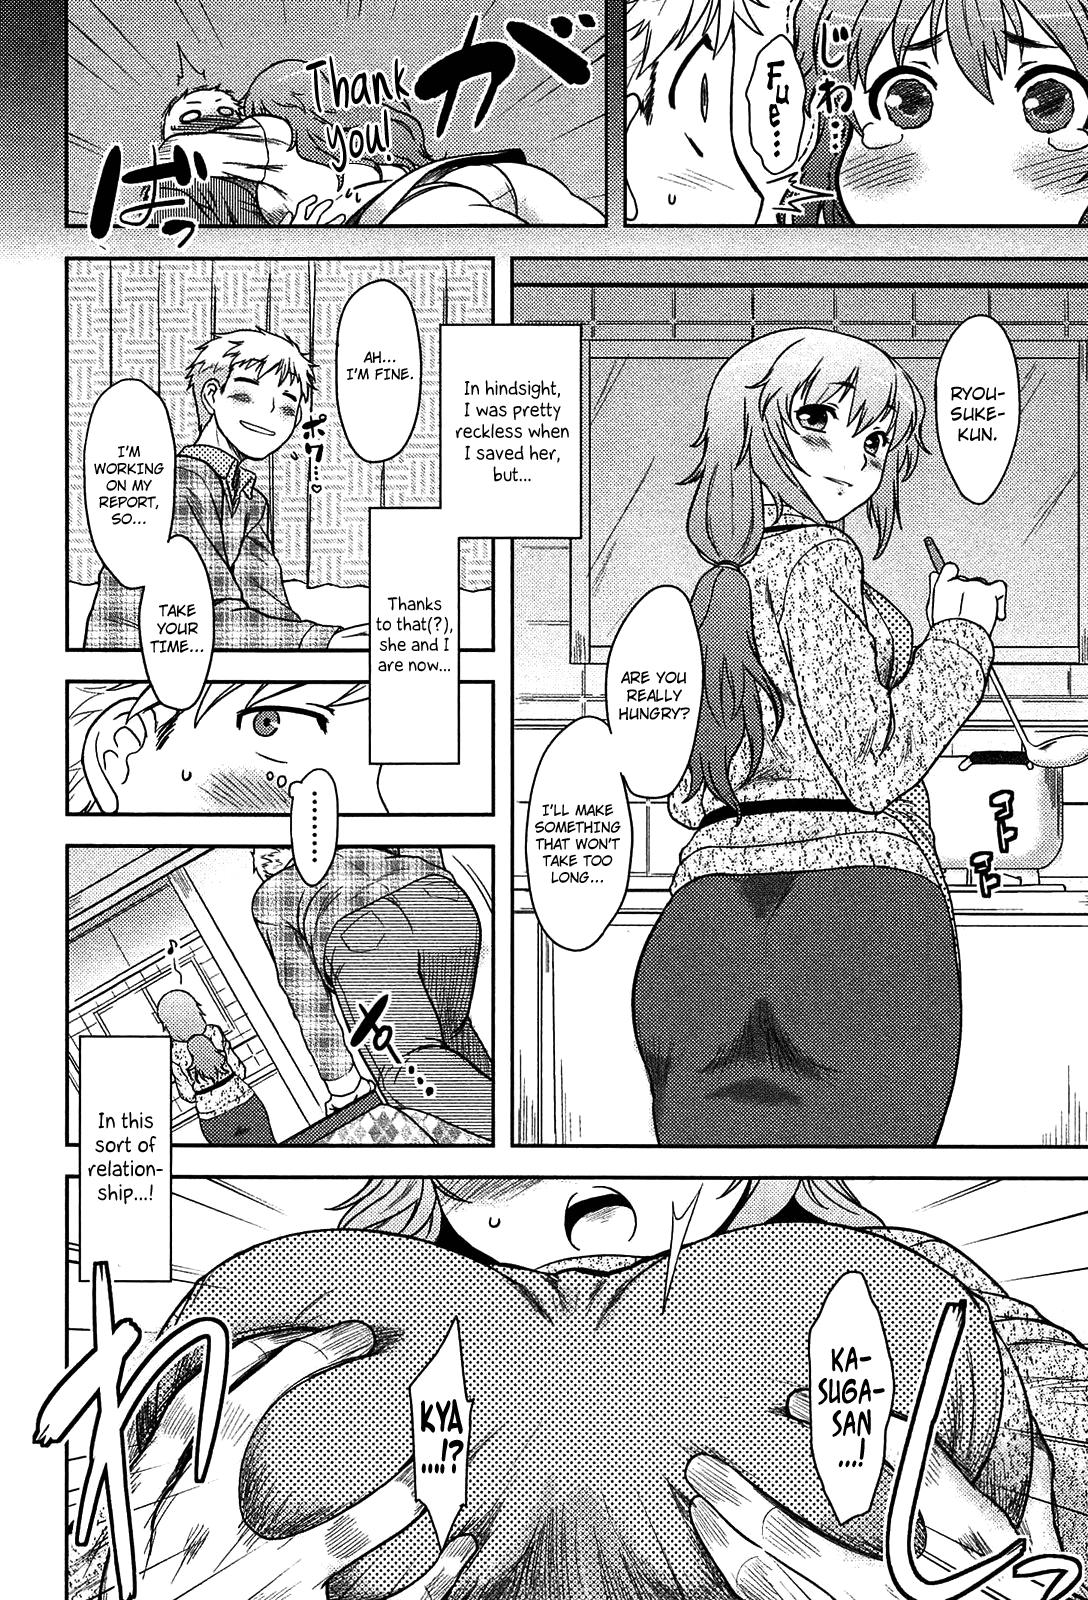 Transsexual Momoiro Daydream Ch. 1-6 Barely 18 Porn - Page 10